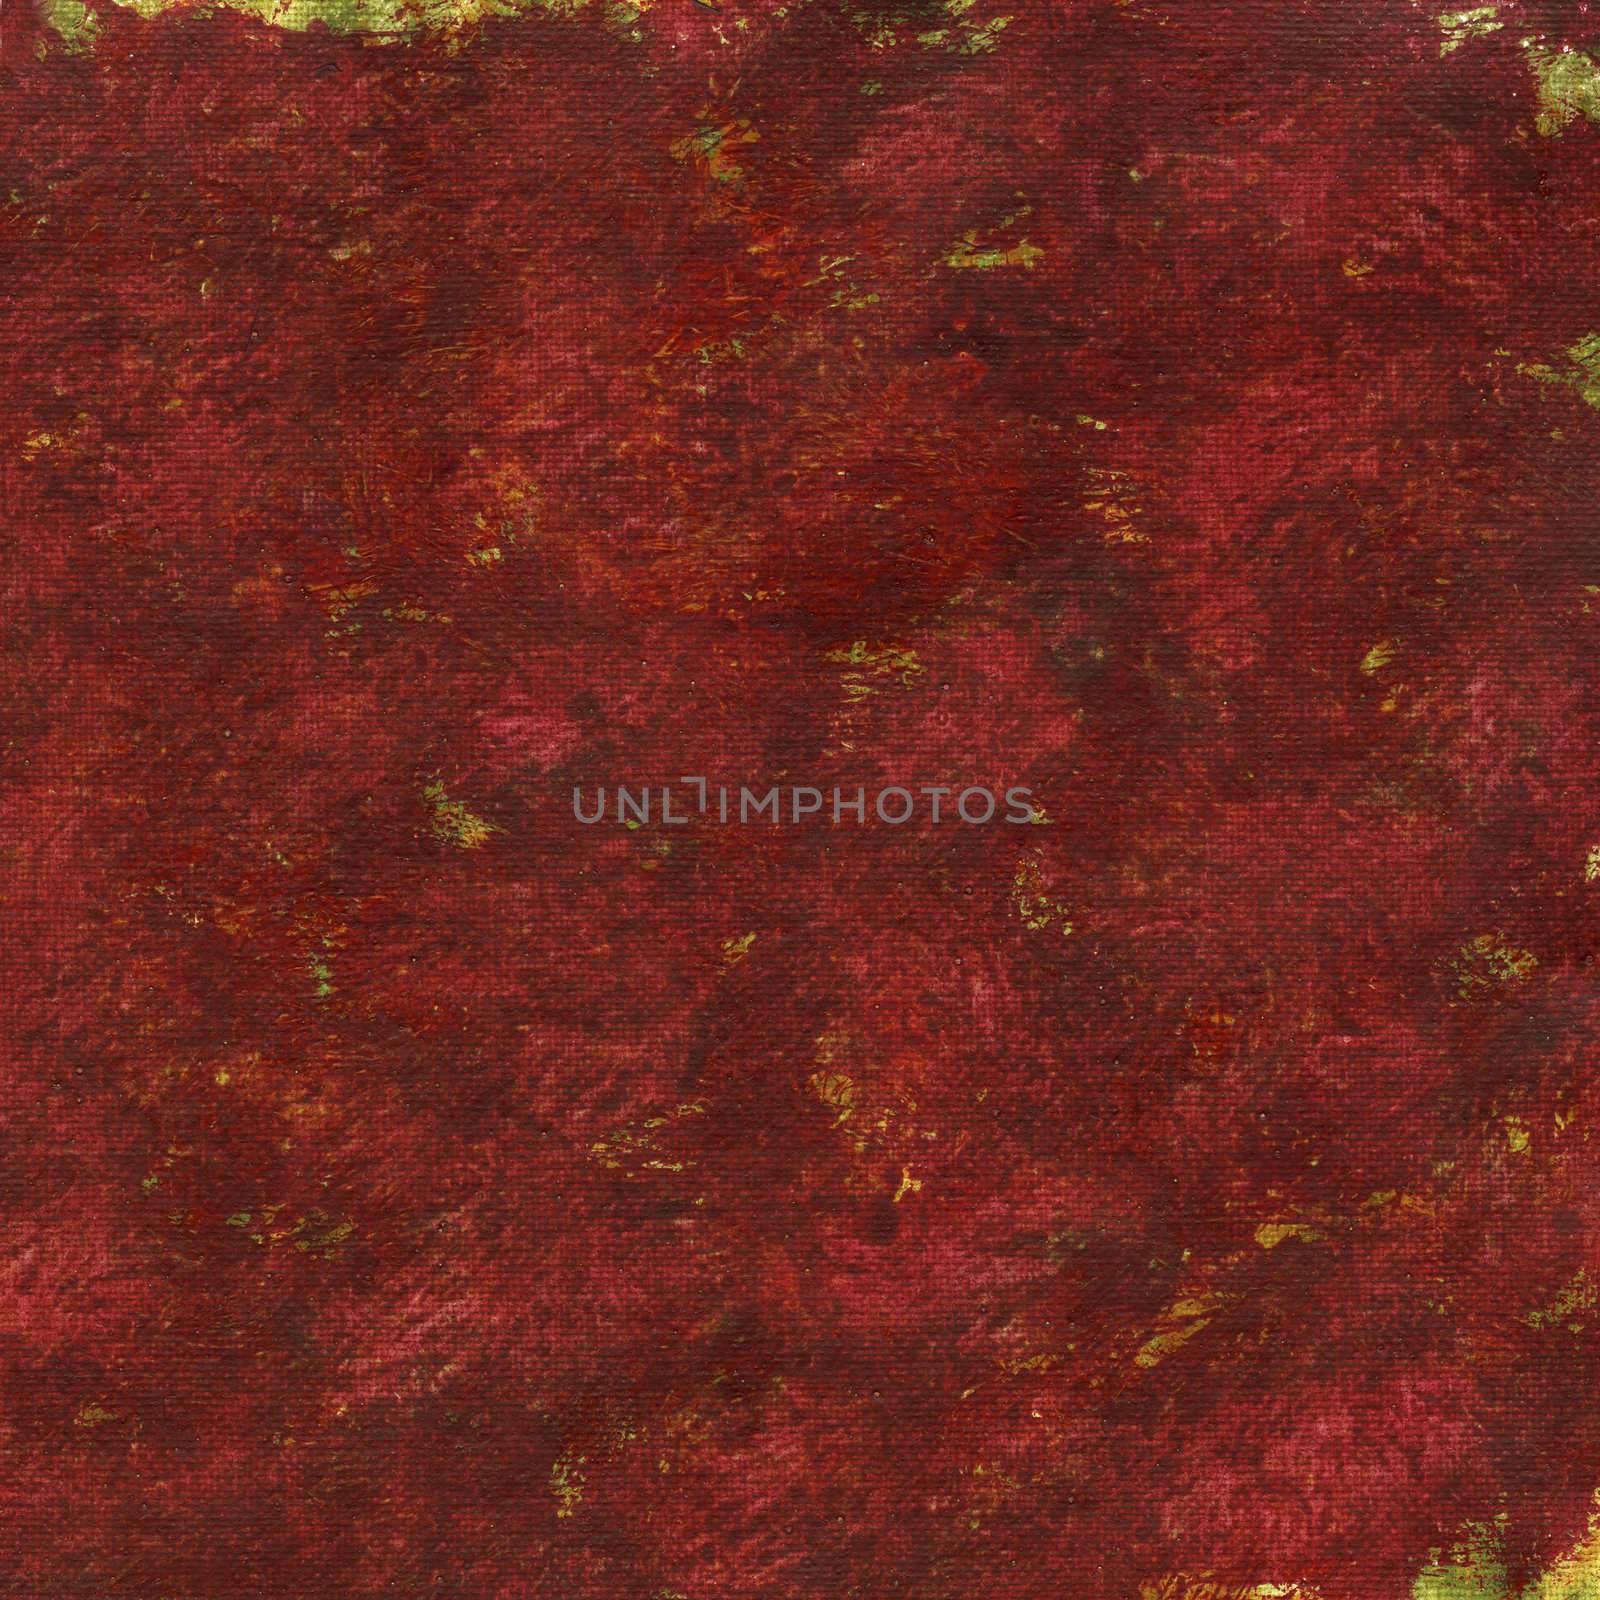 red patchy watercolor painted abstract on artist canvas, self made by photographer